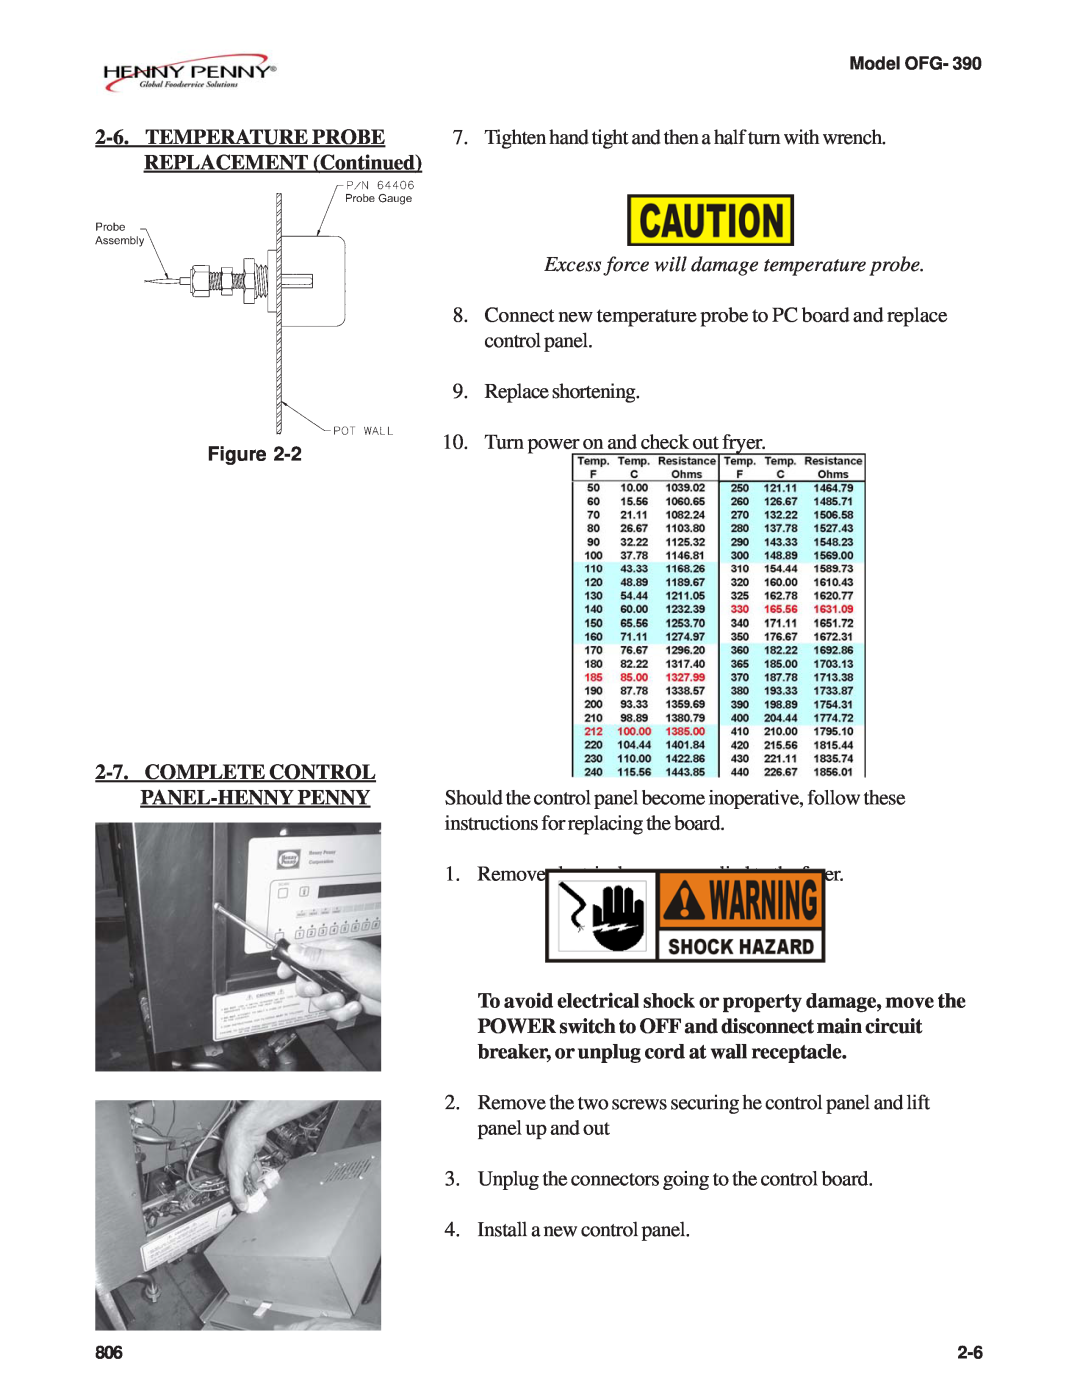 Henny Penny OFG-392 technical manual REPLACEMENT Continued, Complete Control Panel-Hennypenny 